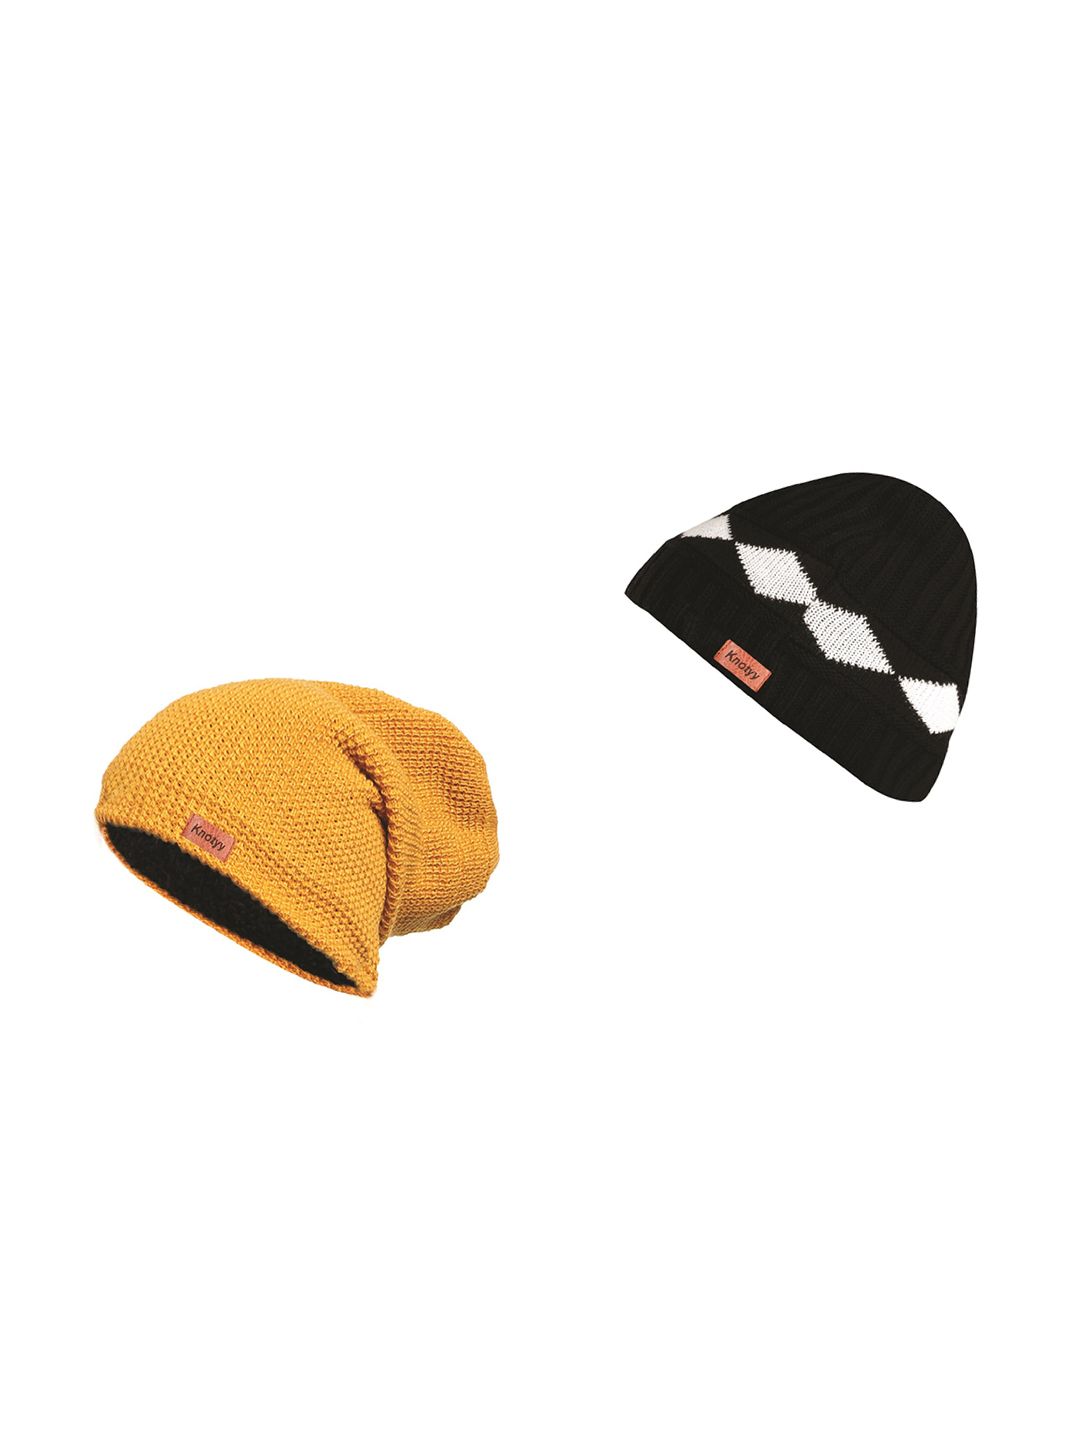 Knotyy Unisex Pack Of 2 Beanie Caps Price in India